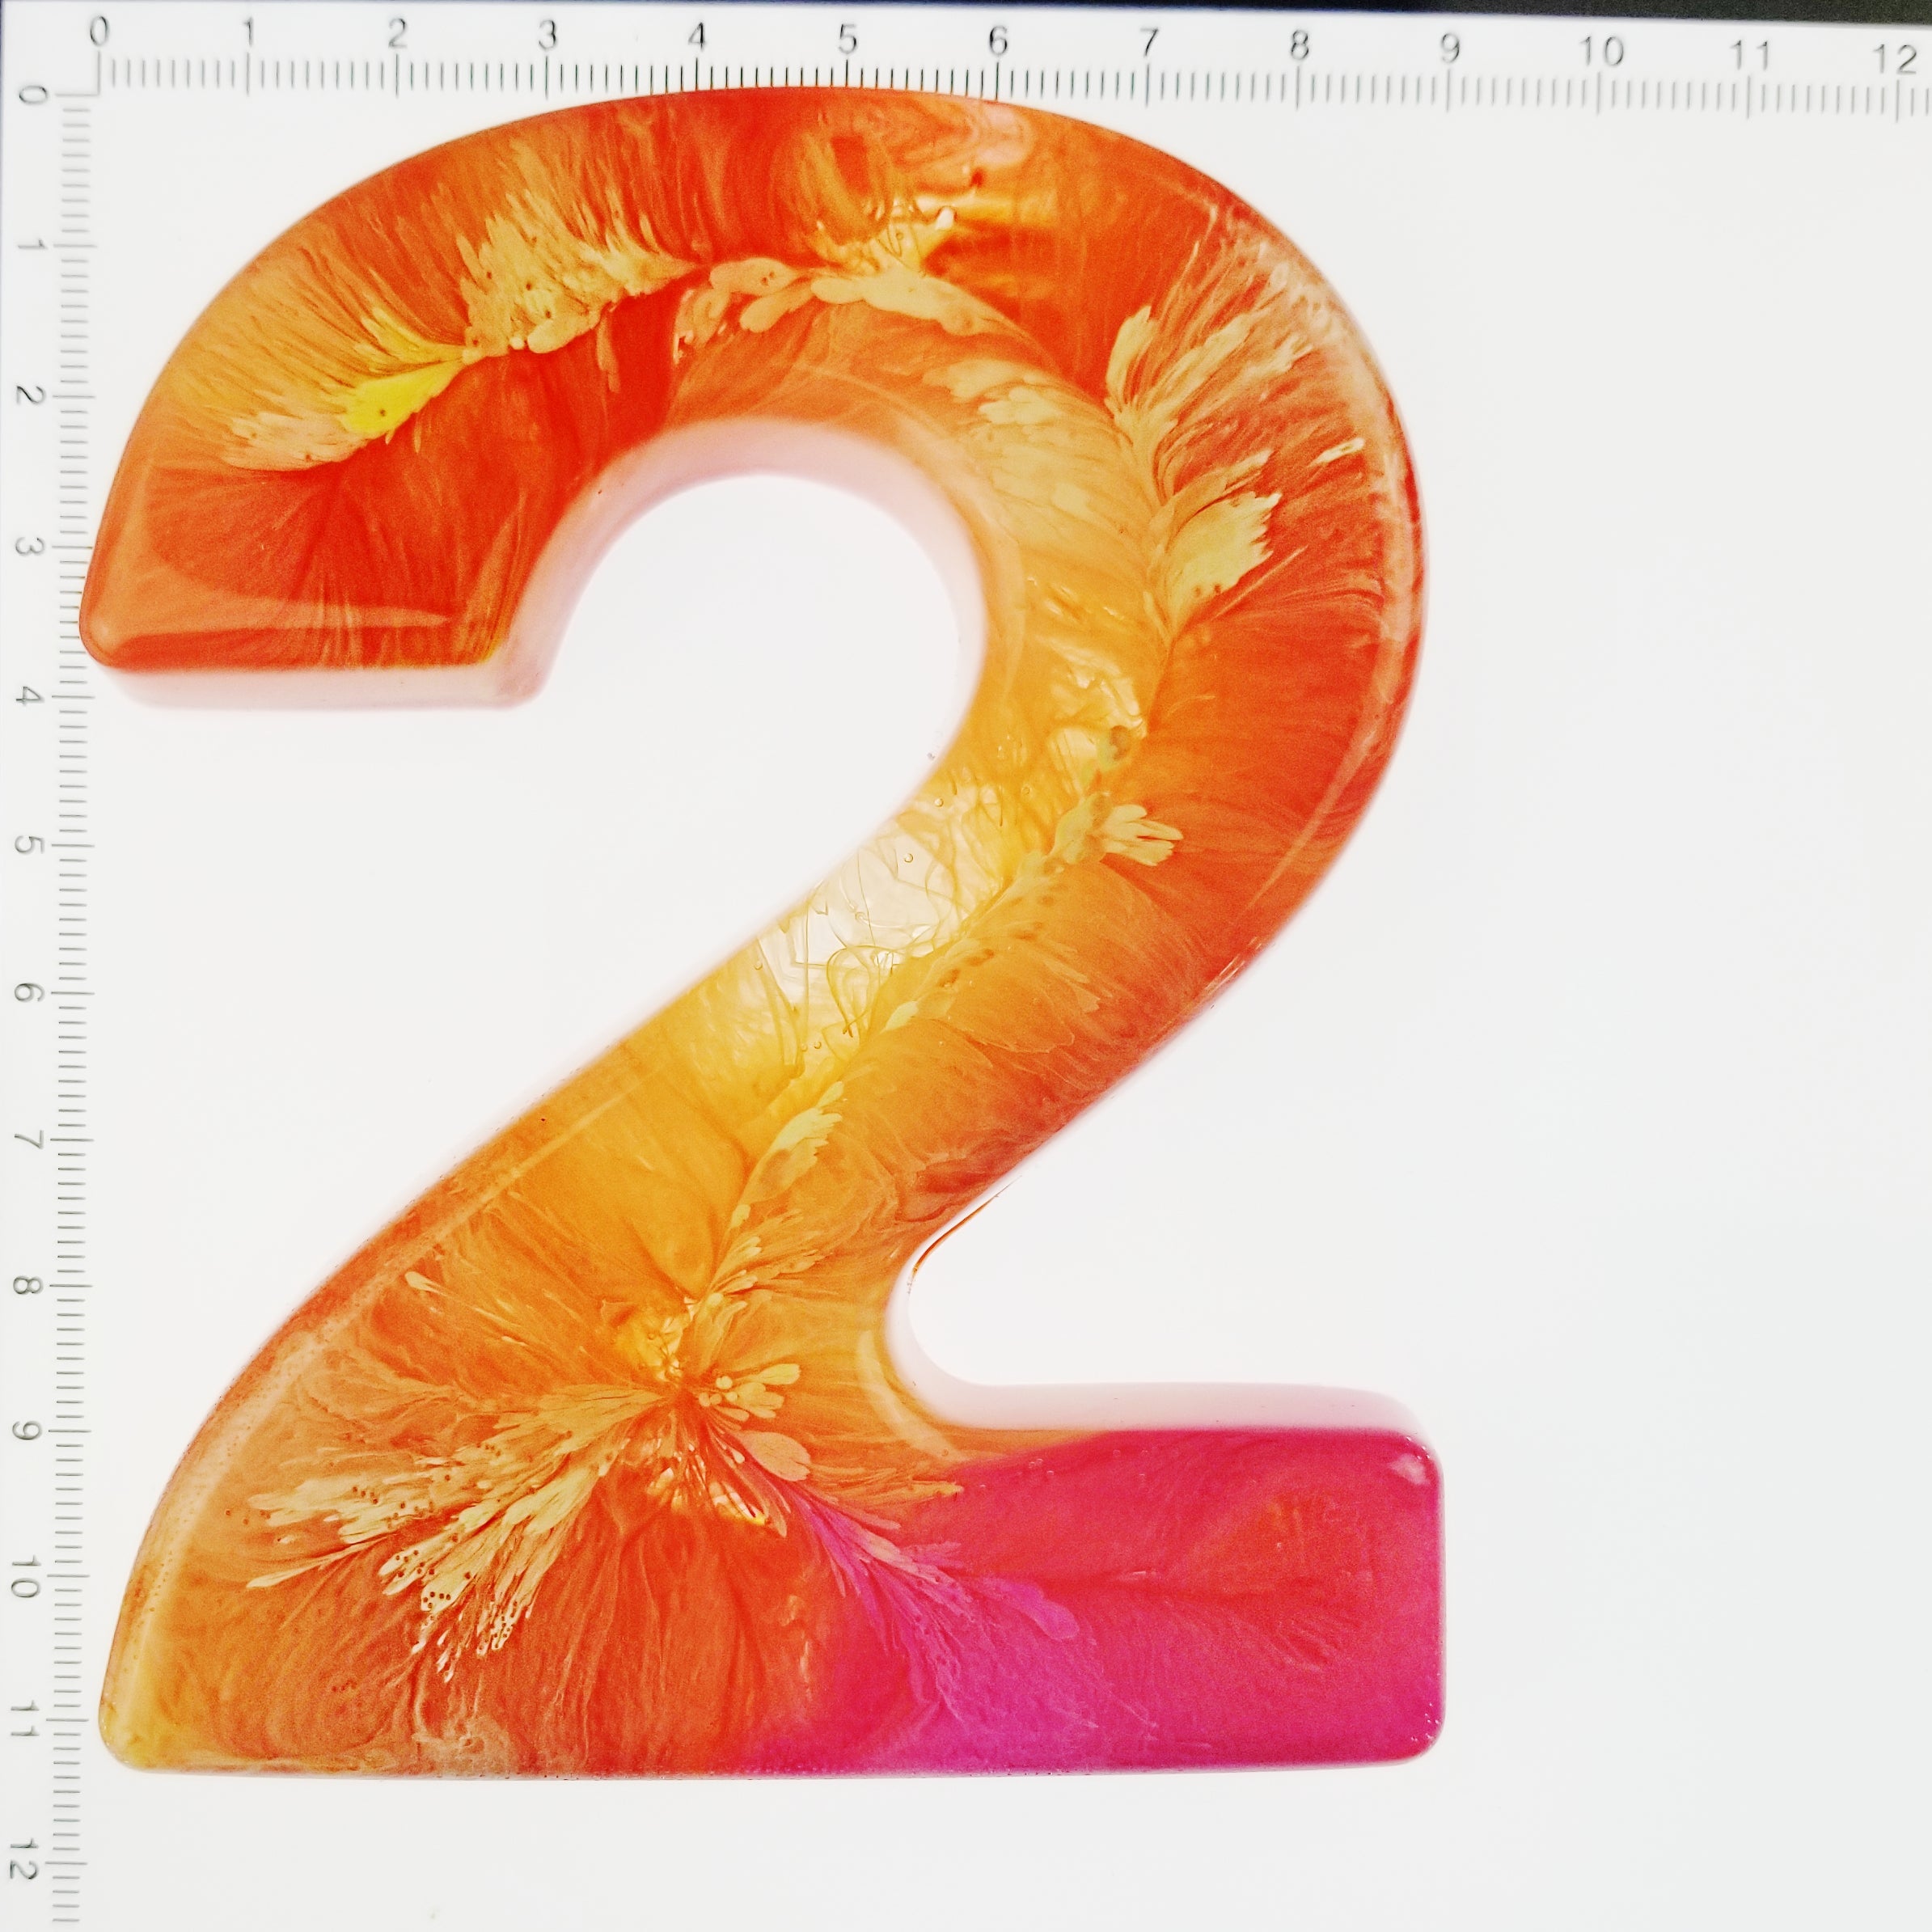 A Psychedelic Resin Number -Individual